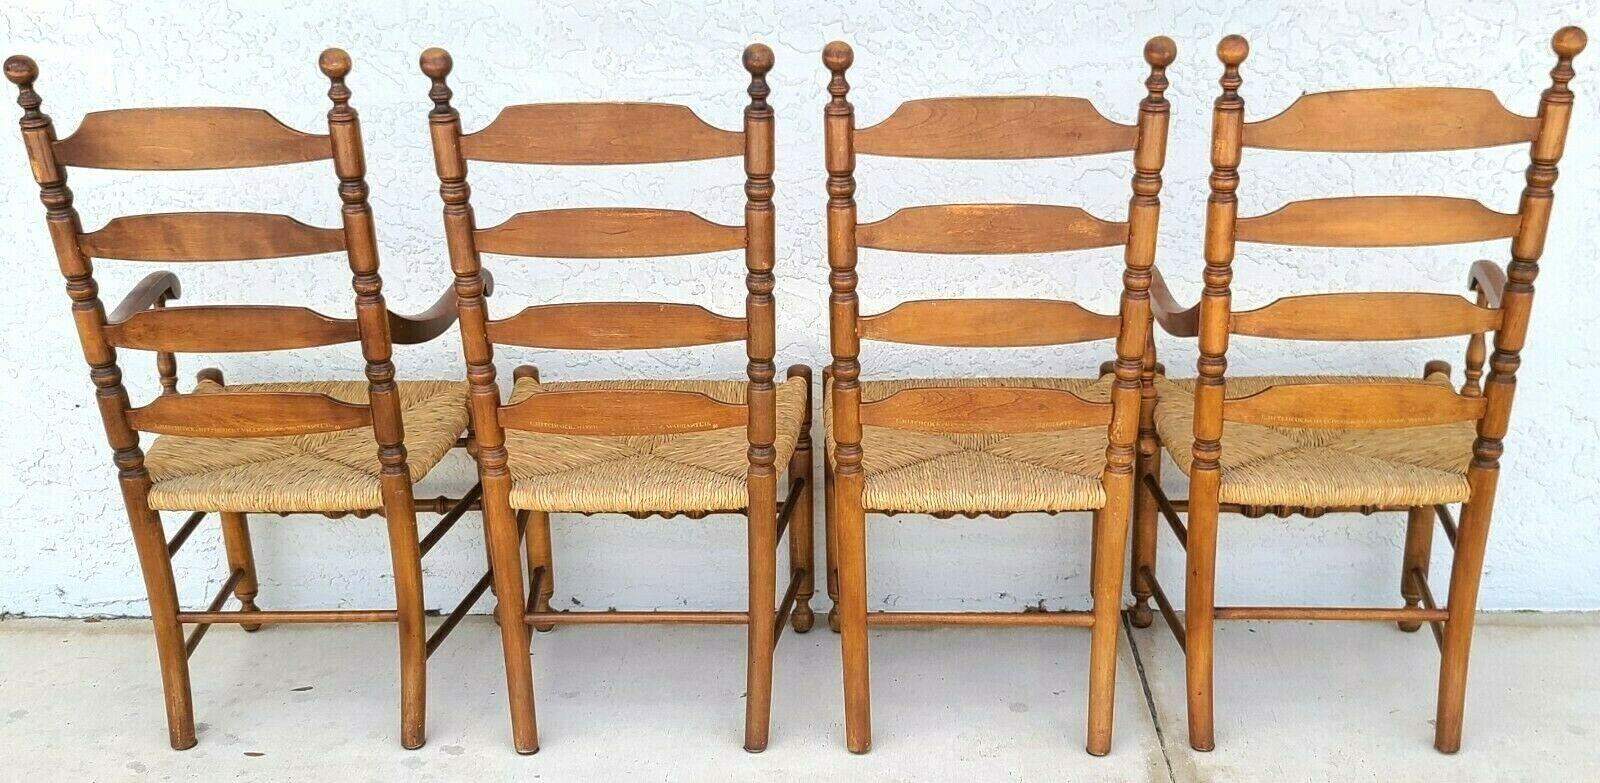 French Provincial Ladder Back Dining Chairs Harvest Stenciled Rush Seat by L Hitchcock For Sale